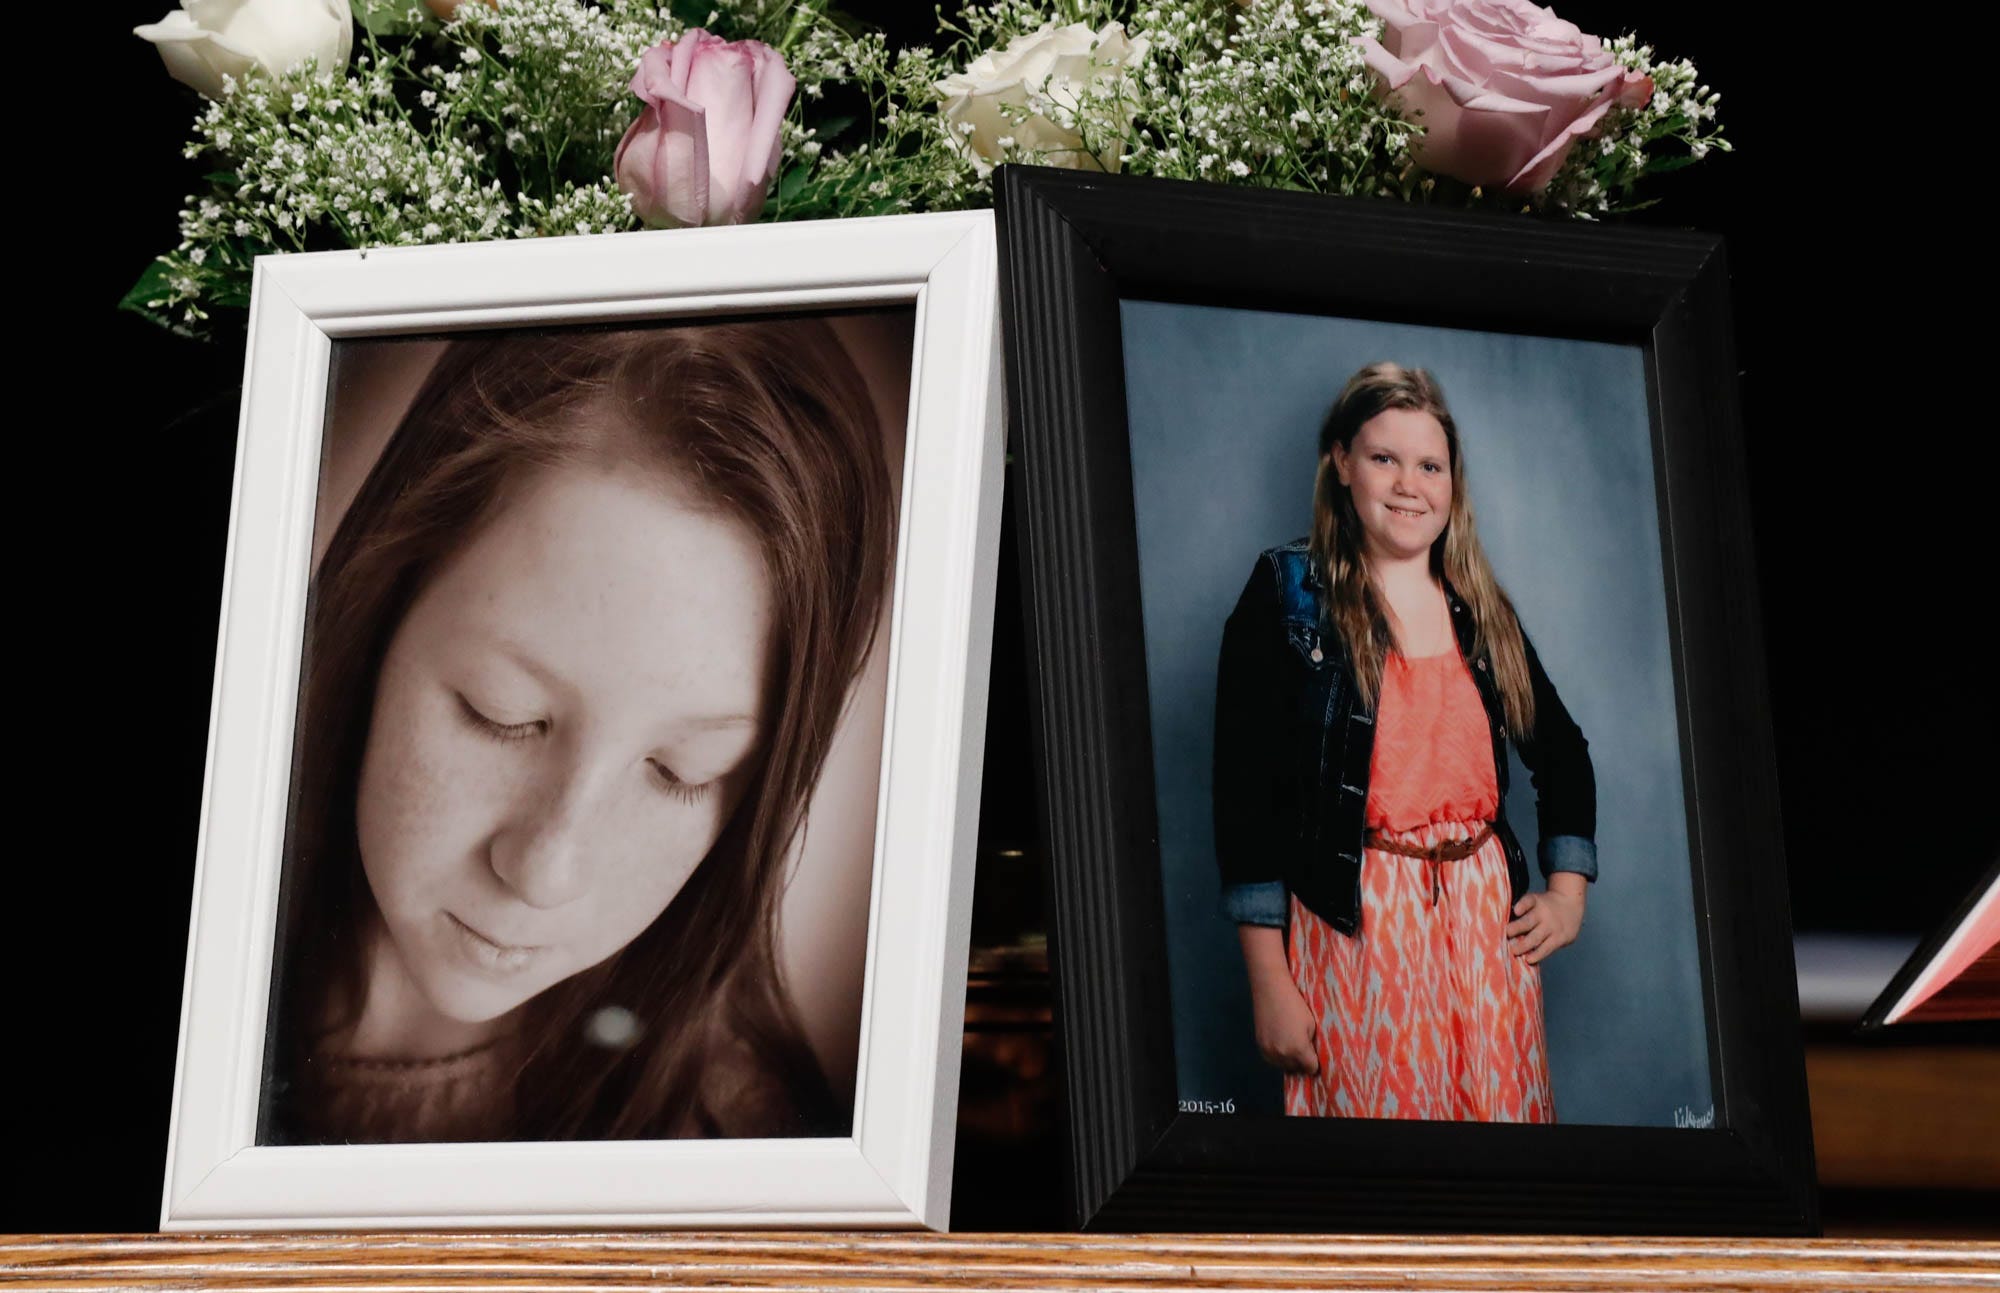 German Teen Amateur - Delphi murders: Everything we've reported on the deaths of Abby & Libby